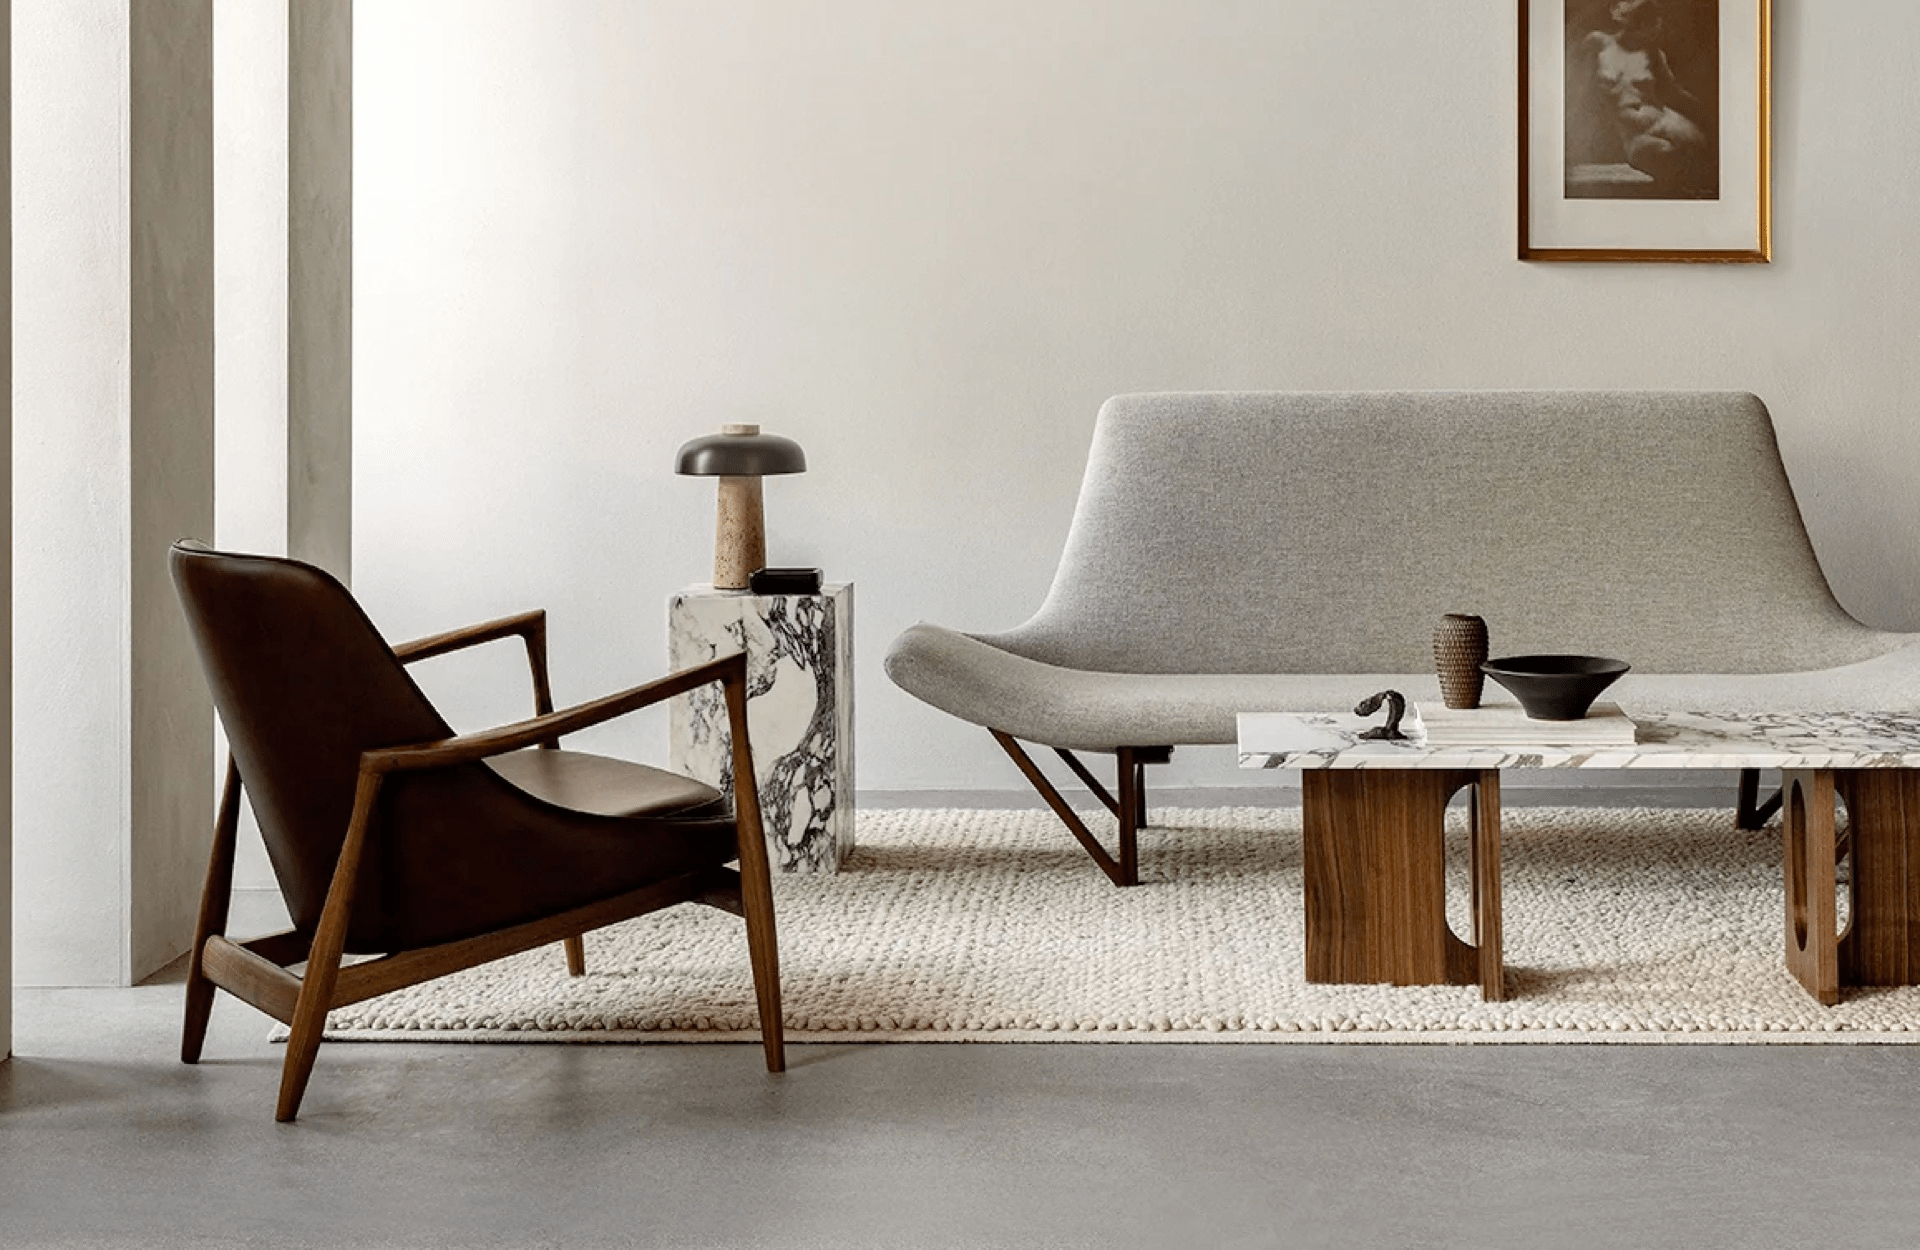 Japandi inspired living room, furniture and photo by Audo Copenhagen